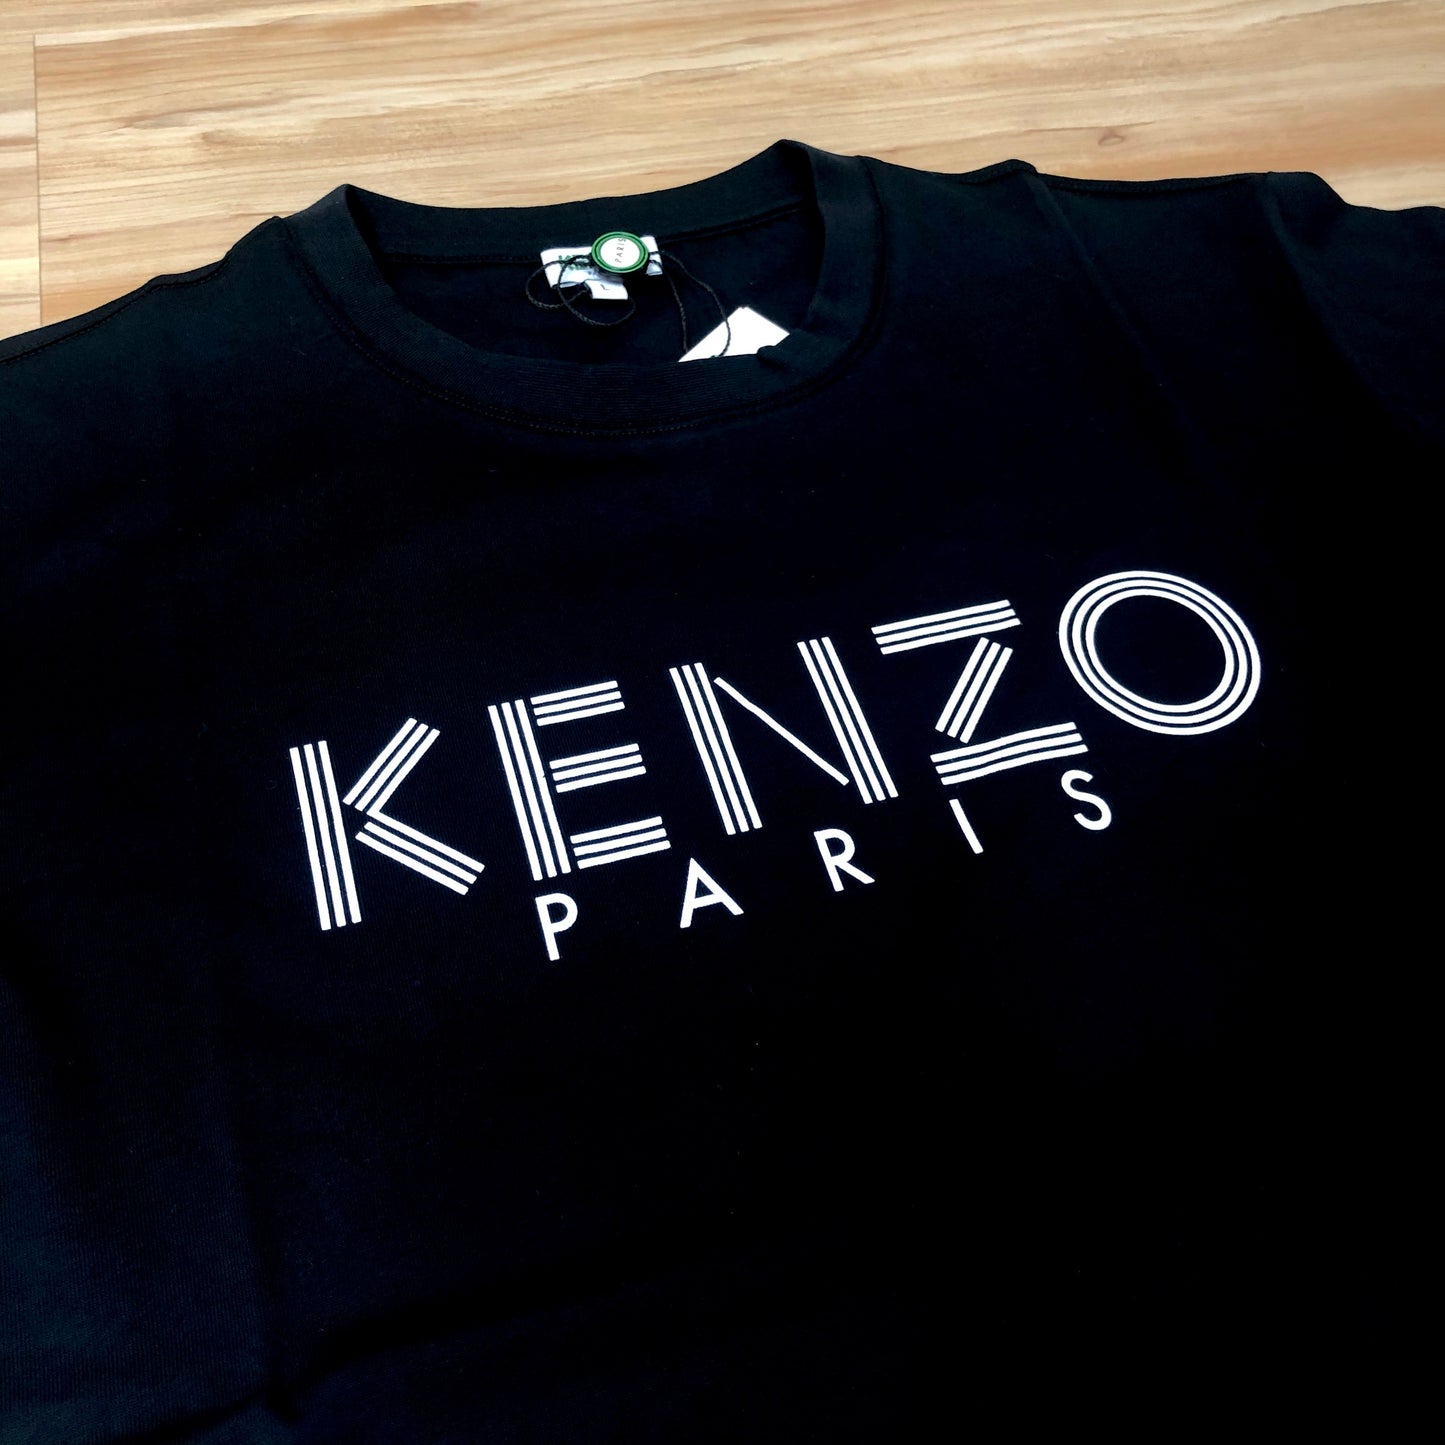 Kenzo Paris Wording T-Shirt - Shop Streetwear, Sneakers, Slippers and Gifts online | Malaysia - The Factory KL